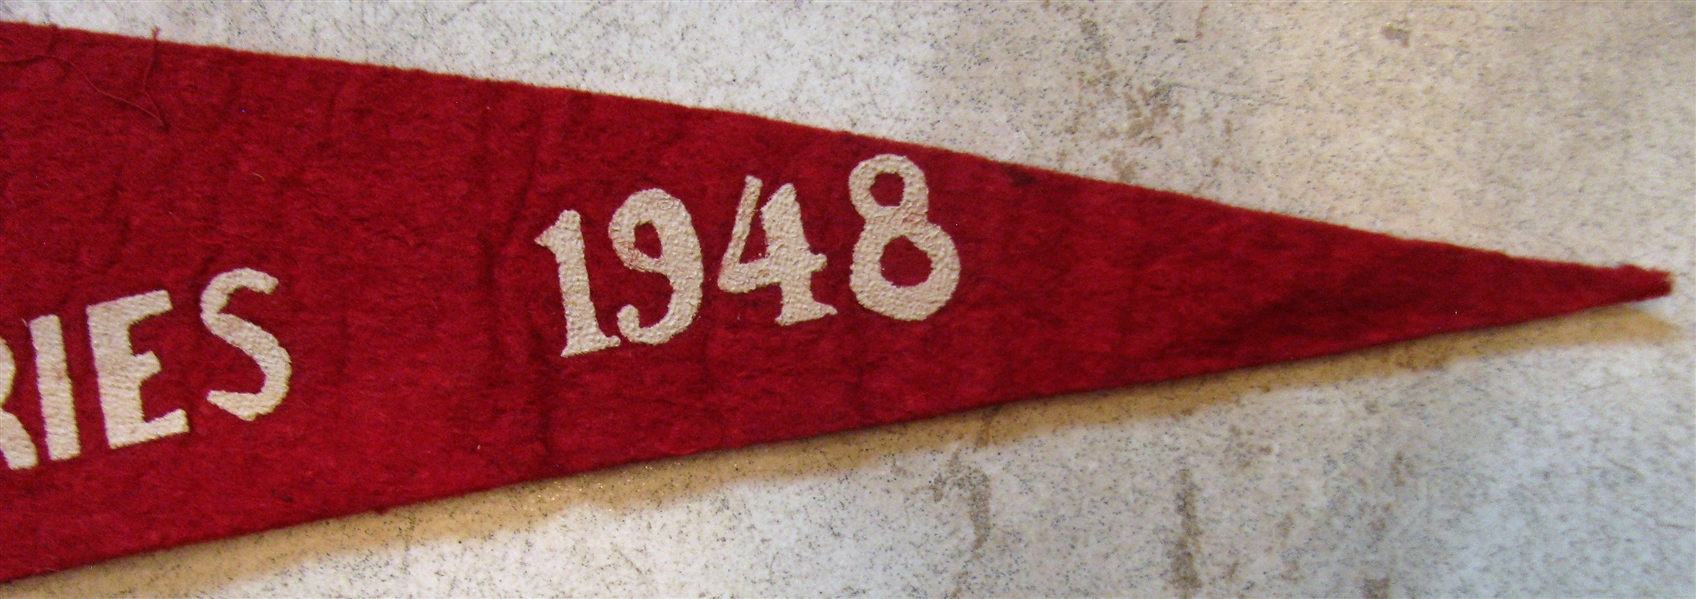 1948 WORLD SERIES PENNANT- CLEVELAND INDIANS ISSUE